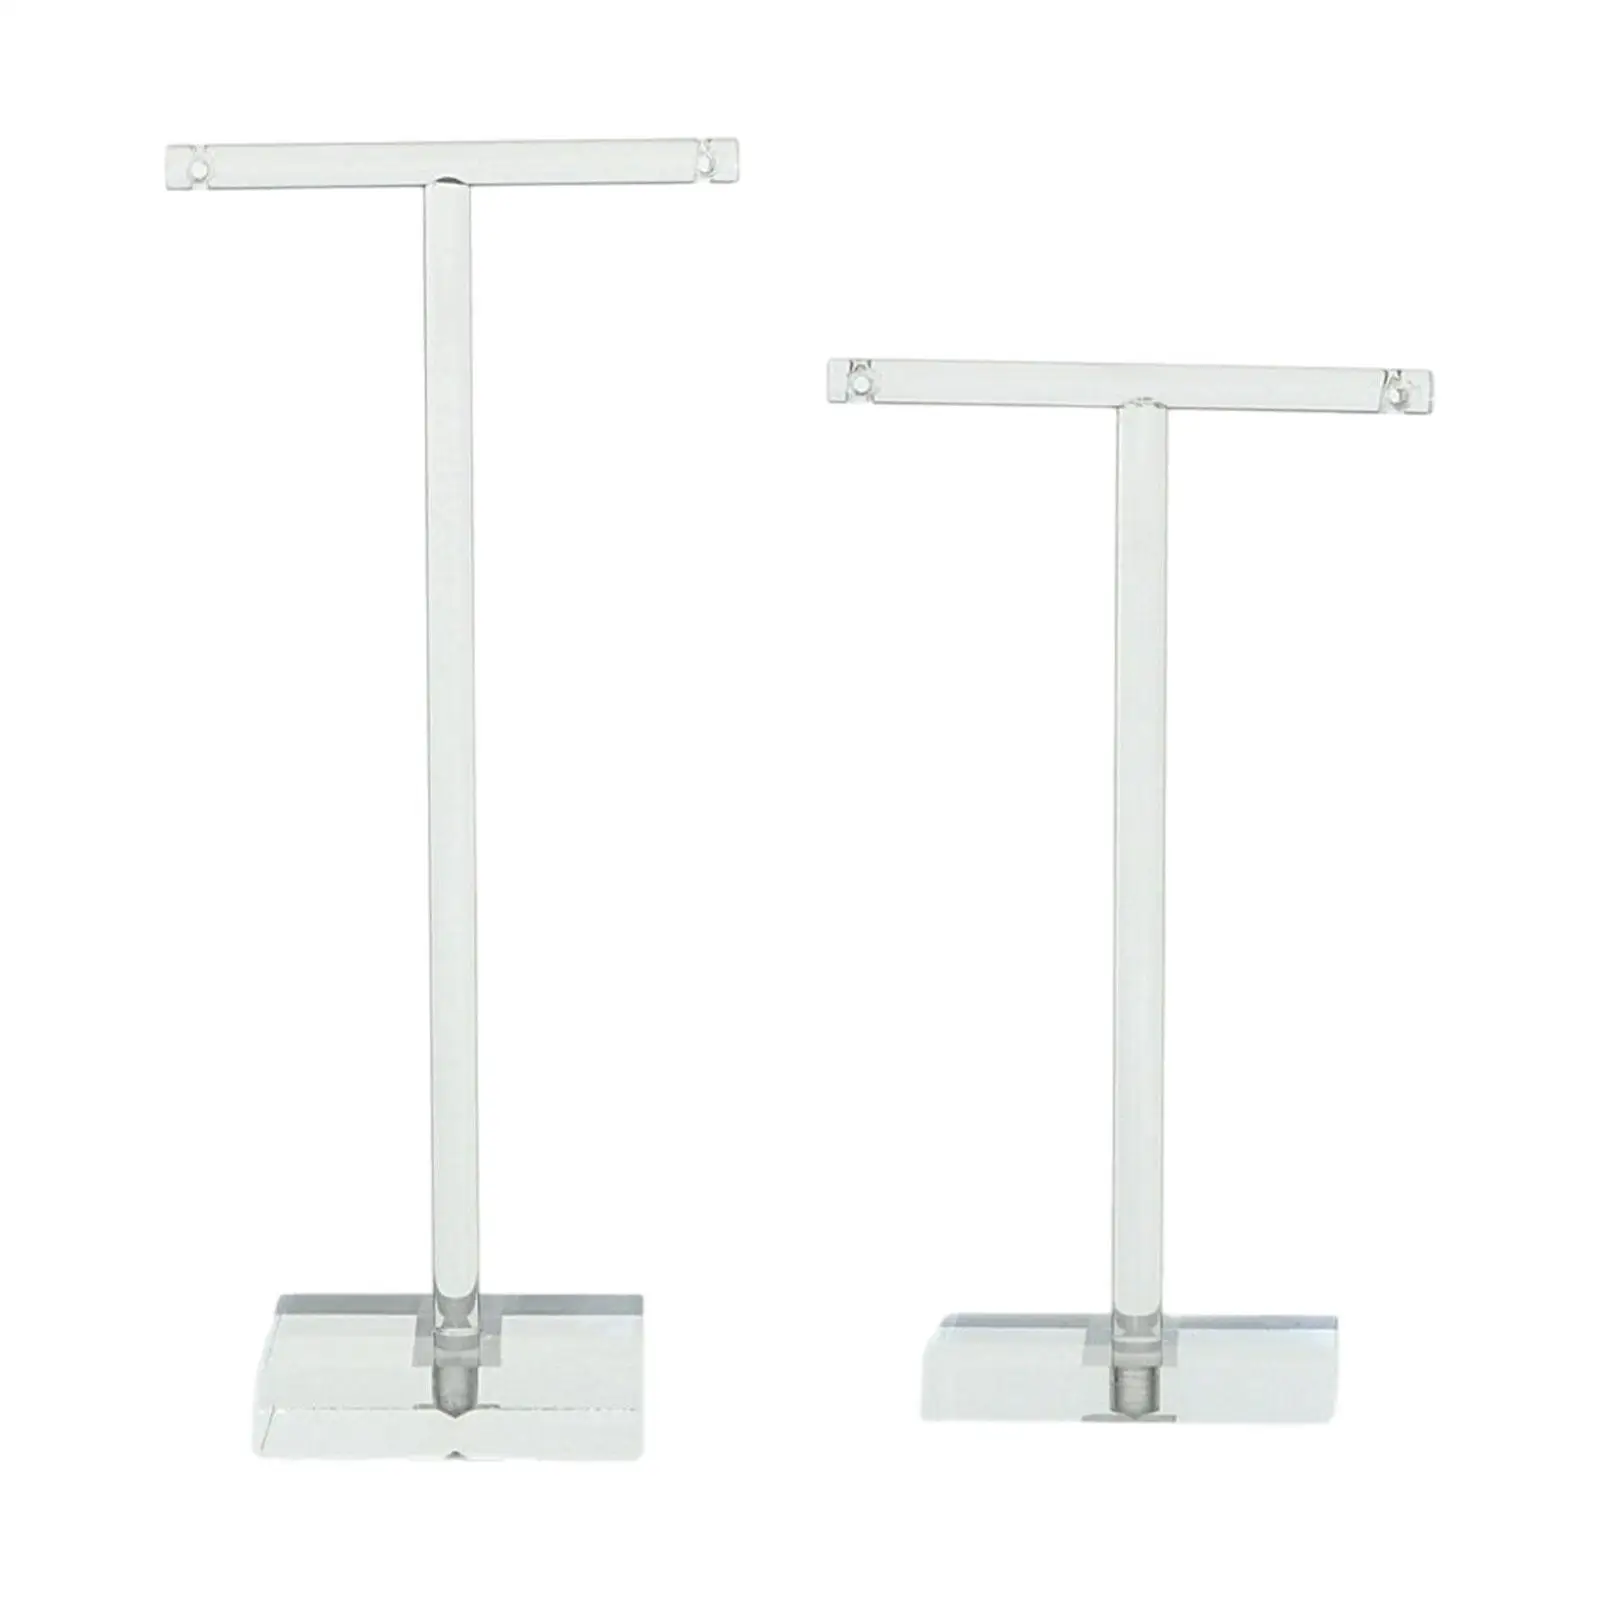 2x Earring Display Stand T Bar for Women Girls Stable Base Jewelry Organizer Jewelry Stand for Desktop Dresser Home Vanity Store